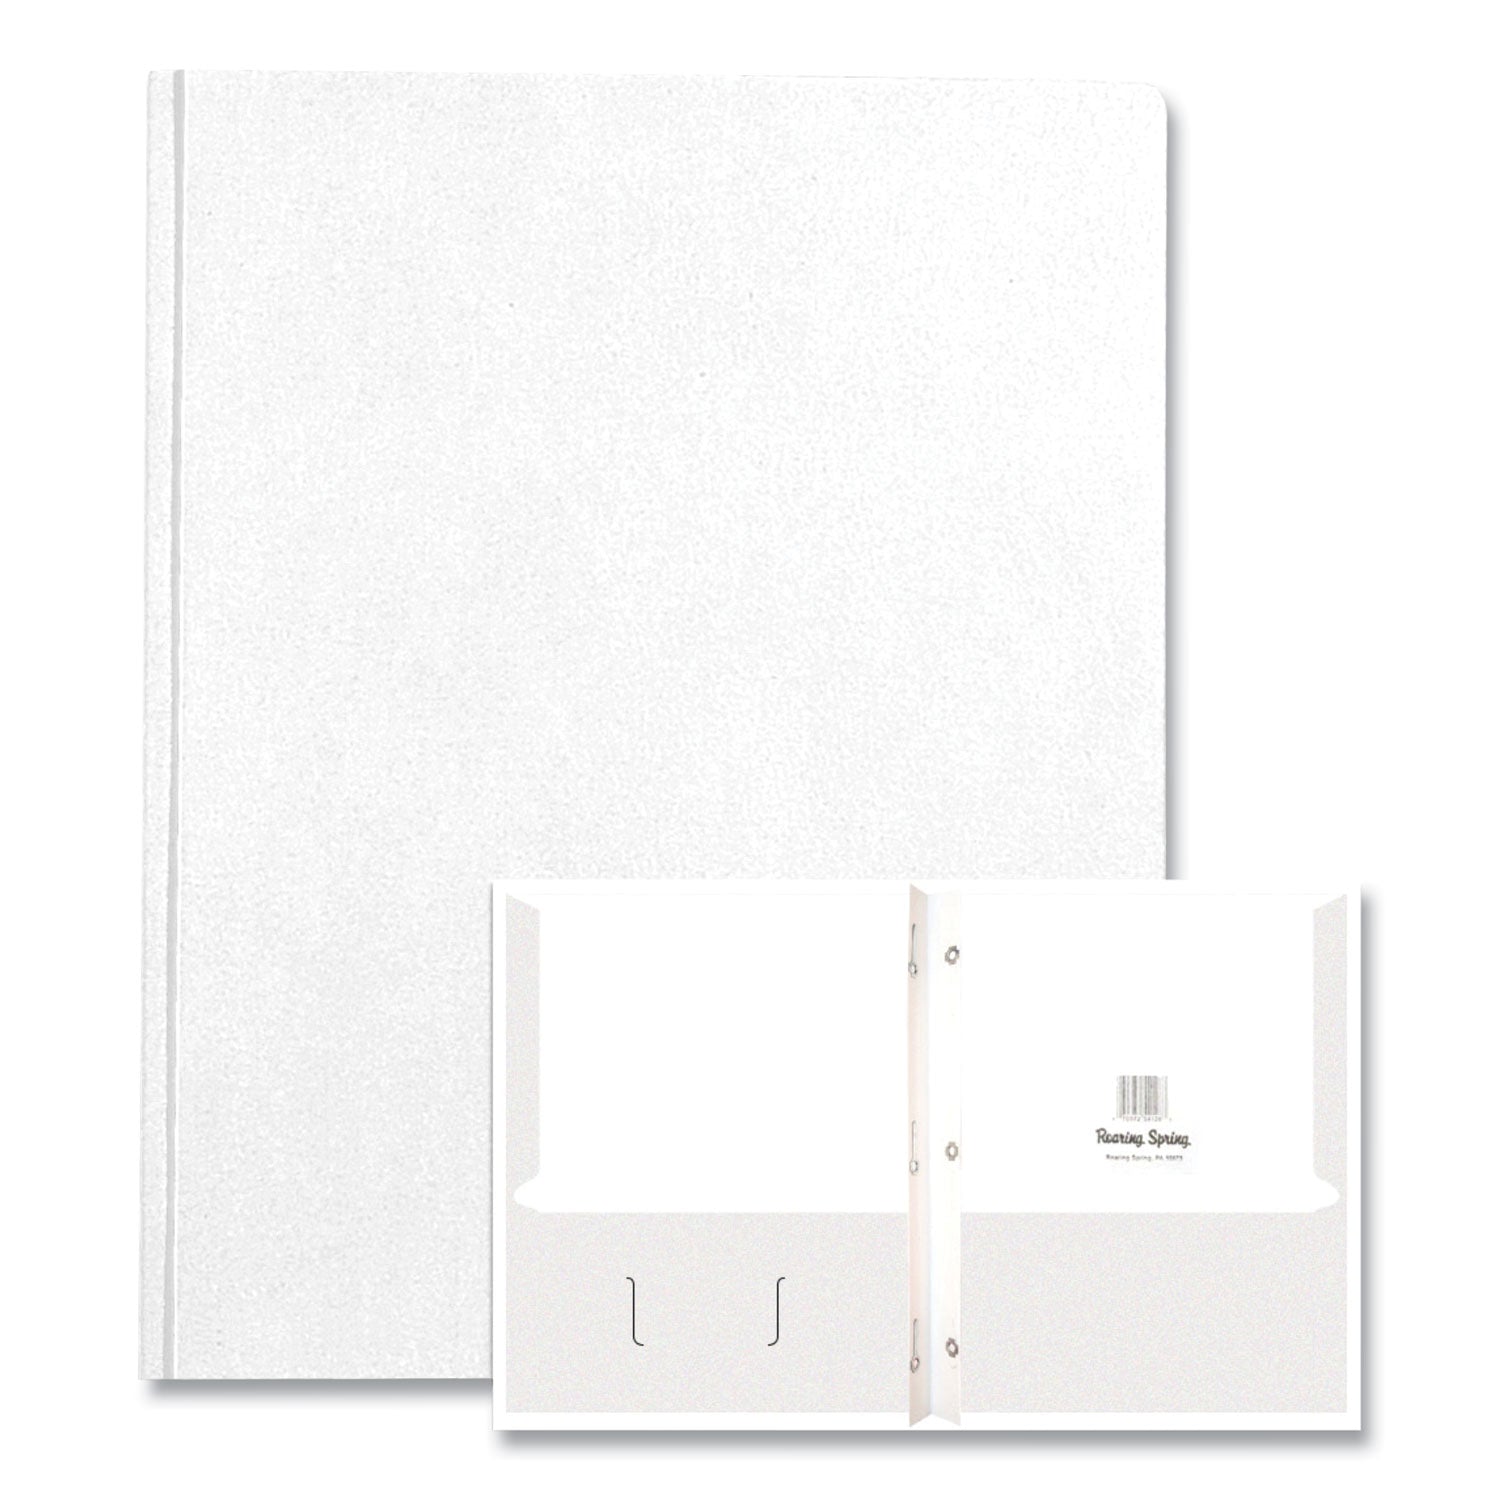 pocket-folder-with-3-fasteners-05-capacity-11-x-85-white-25-box-10-boxes-carton-ships-in-4-6-business-days_roa54122cs - 2